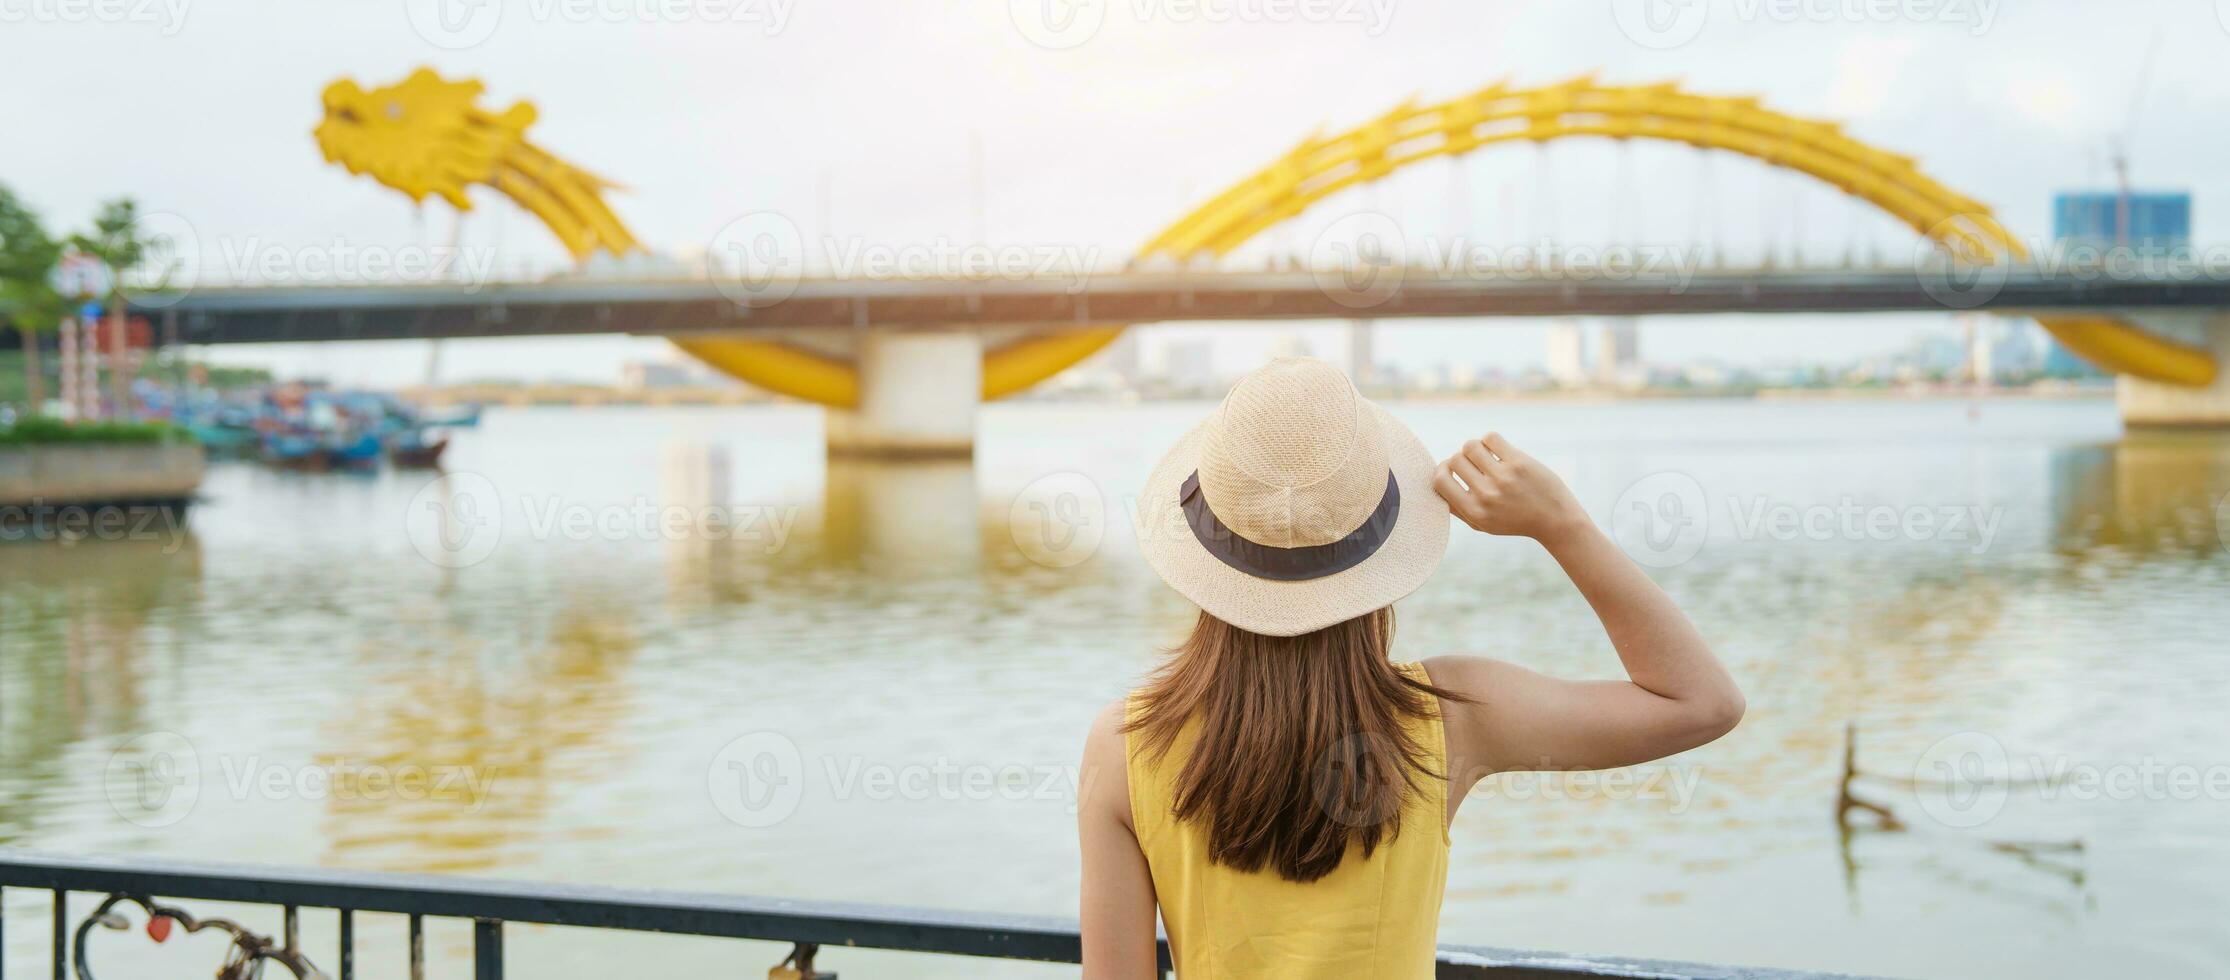 Woman Traveler with yellow dress visiting in Da Nang. Tourist sightseeing the river view with Dragon bridge at love lock bridge. Landmark and popular. Vietnam and Southeast Asia travel concept photo